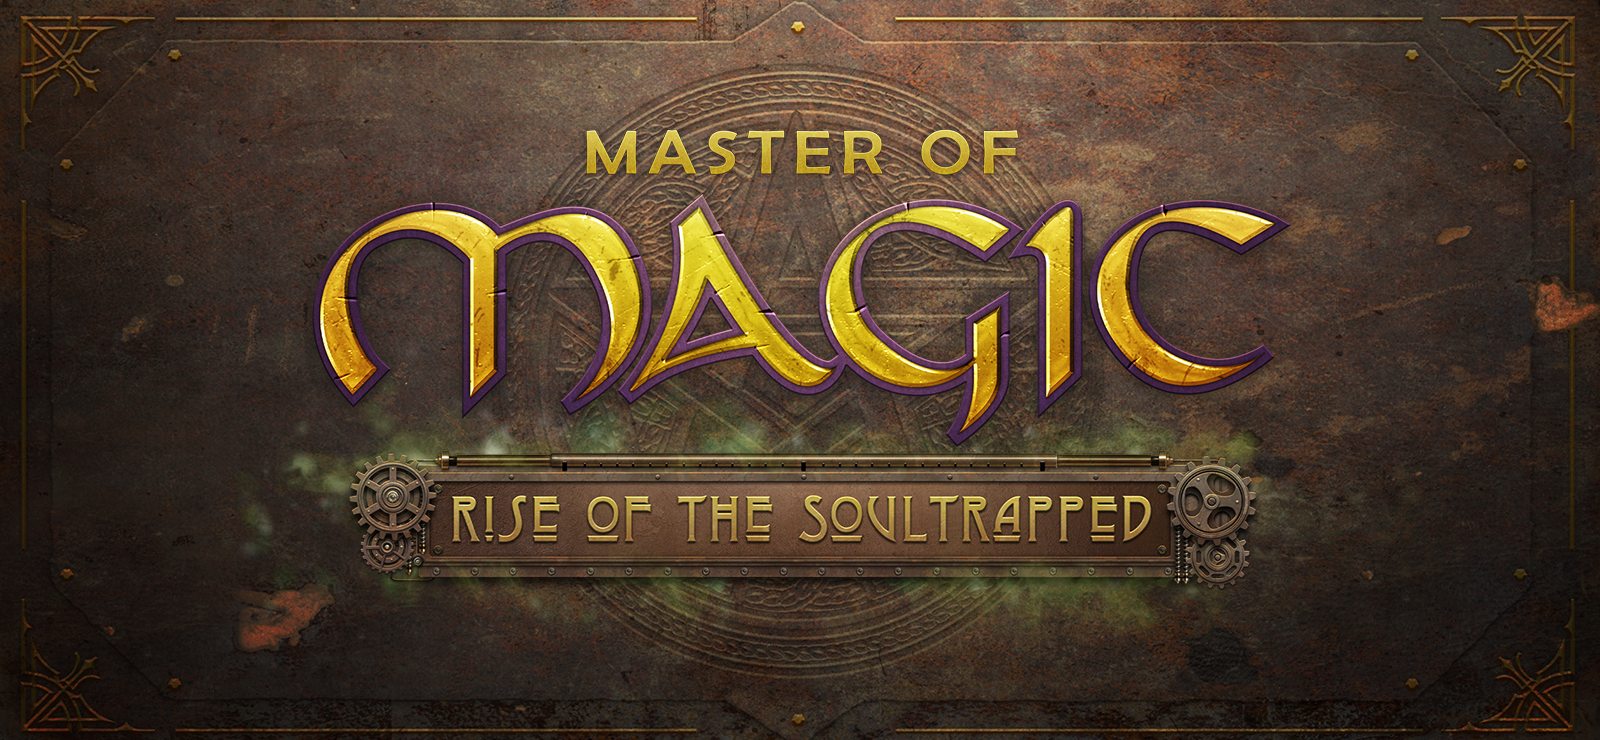 Master Of Magic: Rise Of The Soultrapped